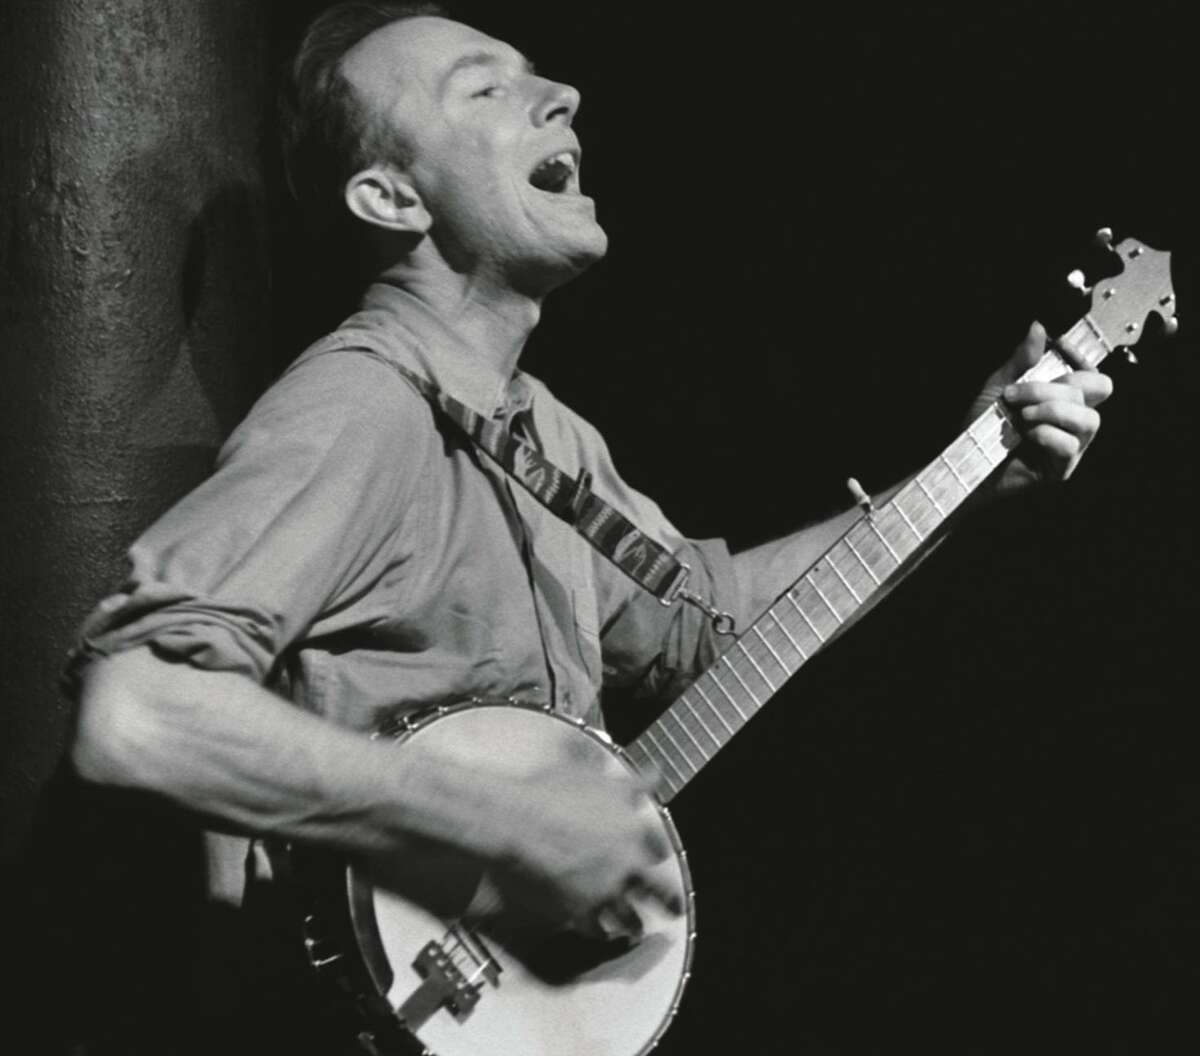 Pete Seeger (image courtesy Guilderland Public Library / The Egg)